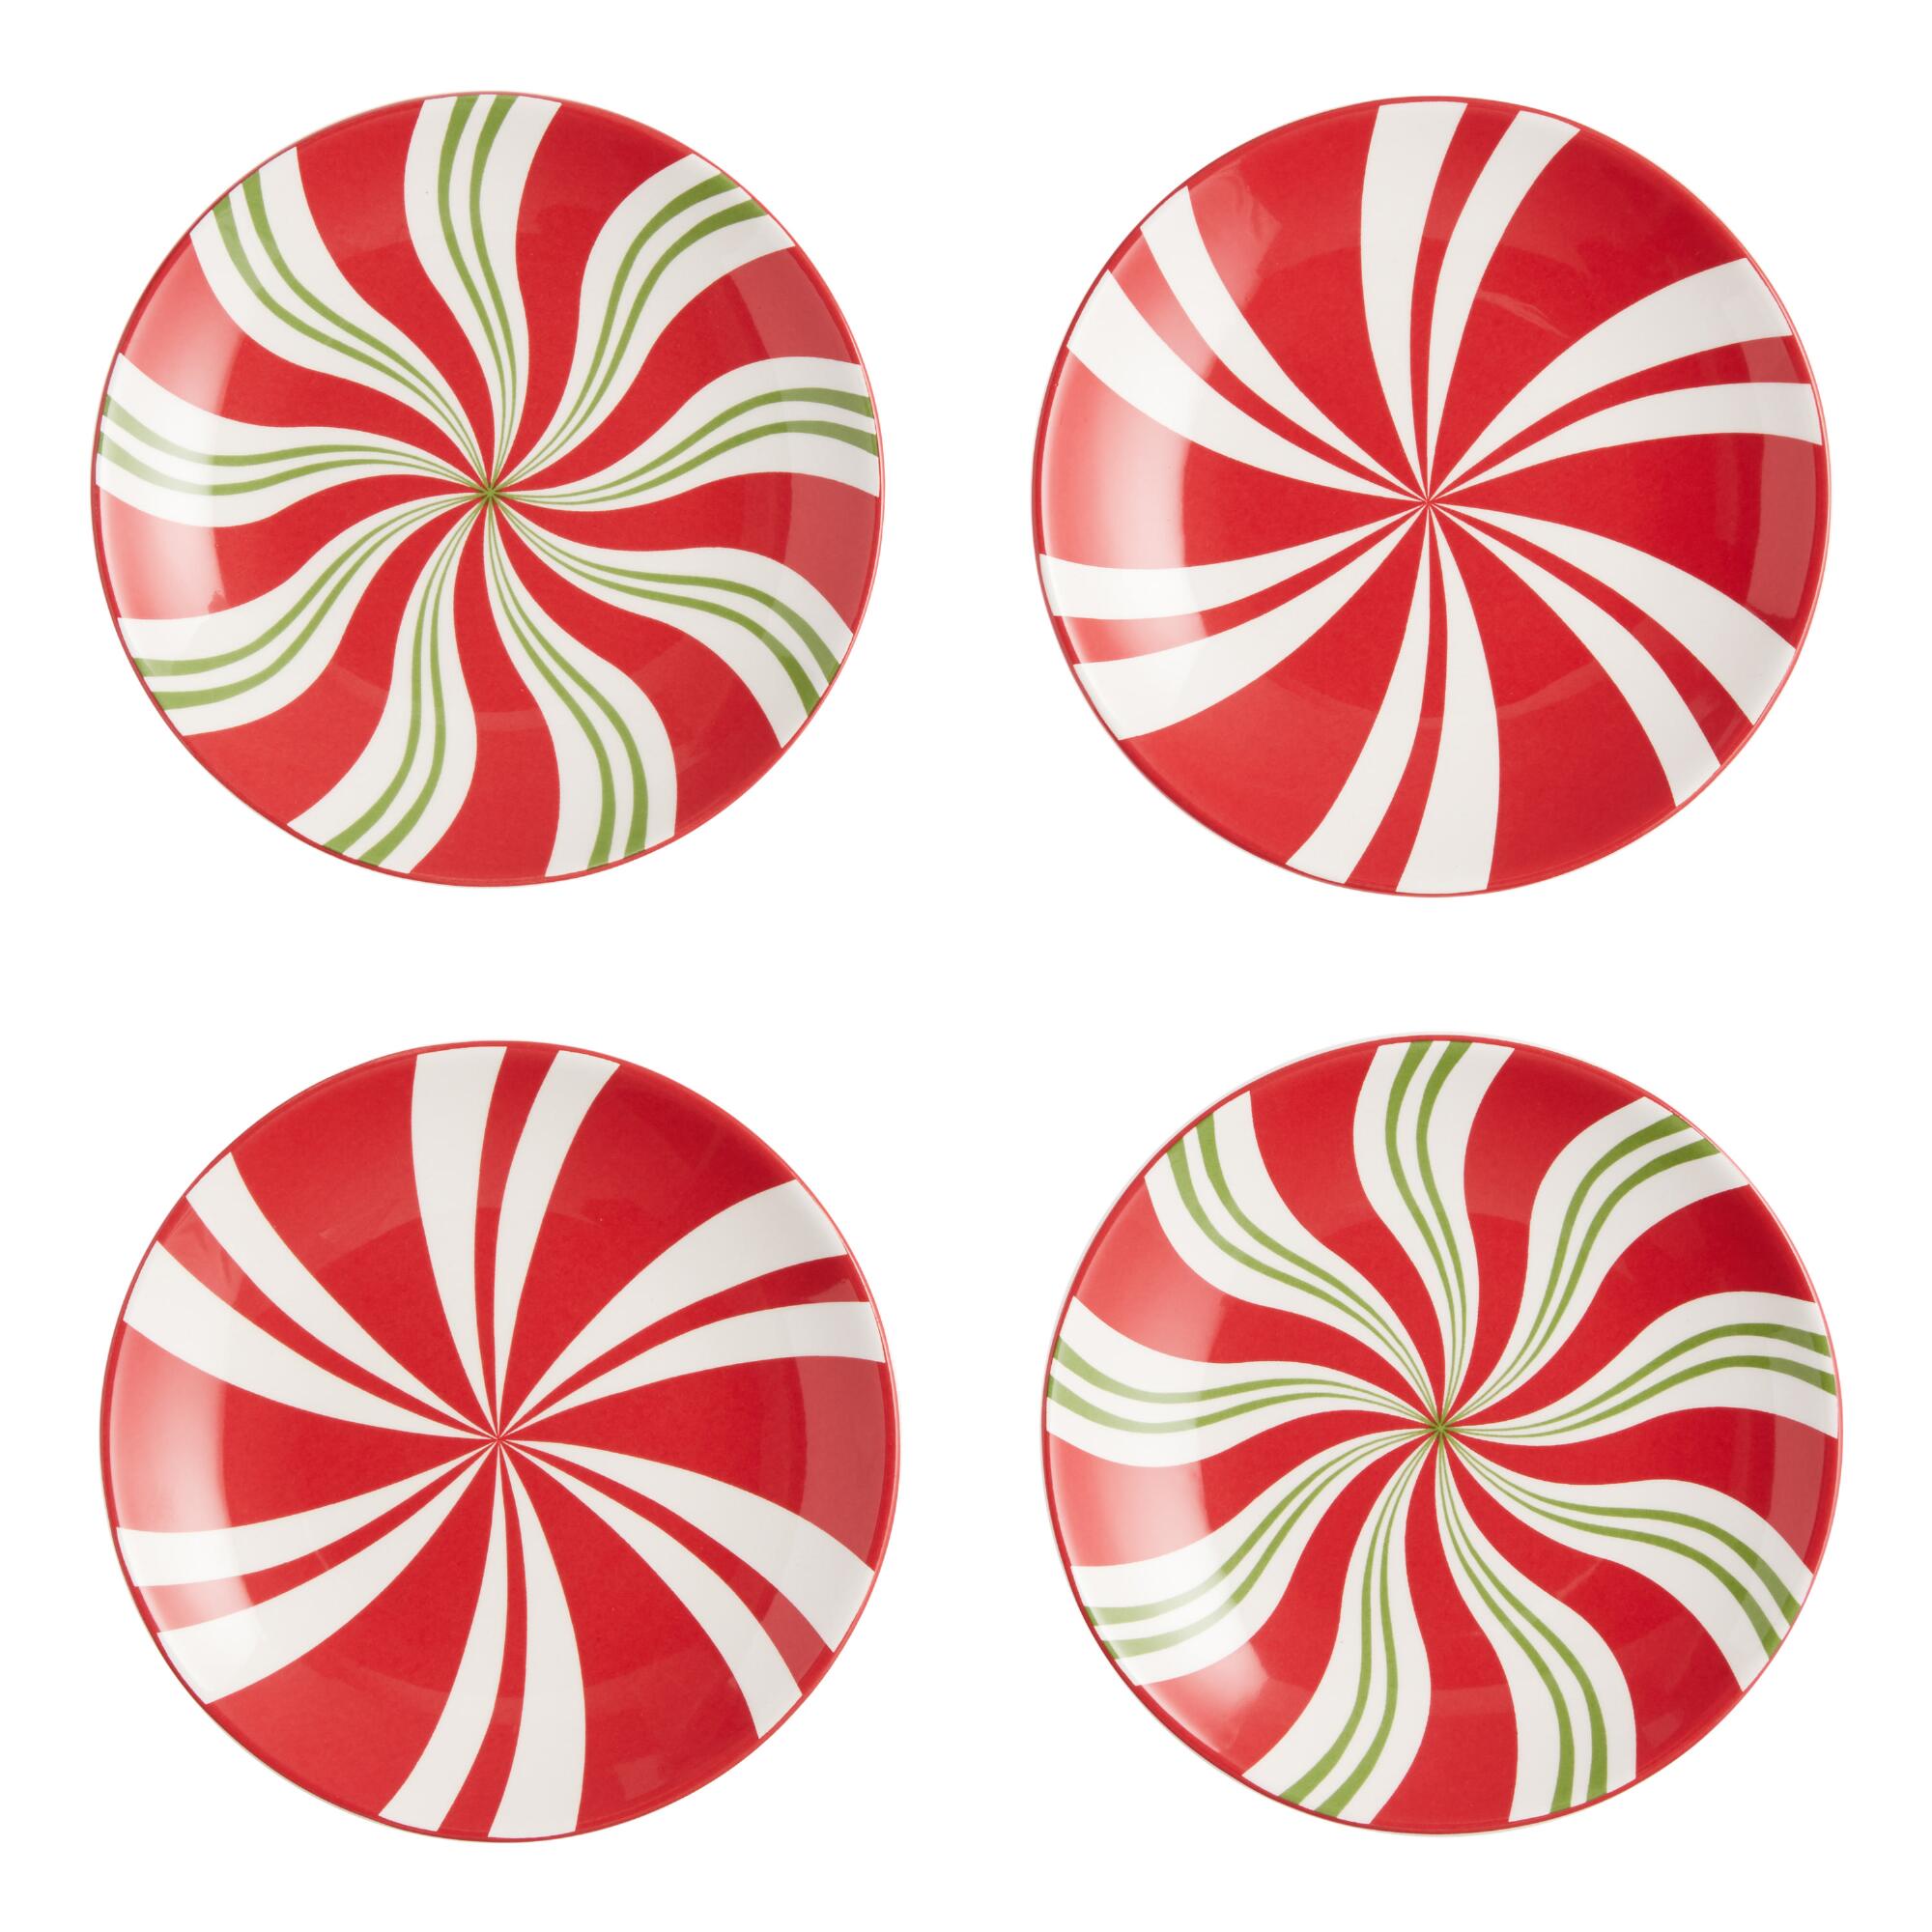 Pier Place Peppermint Swirl Appetizer Plates 4 Pack: Green/Red/White - Earthenware by World Market